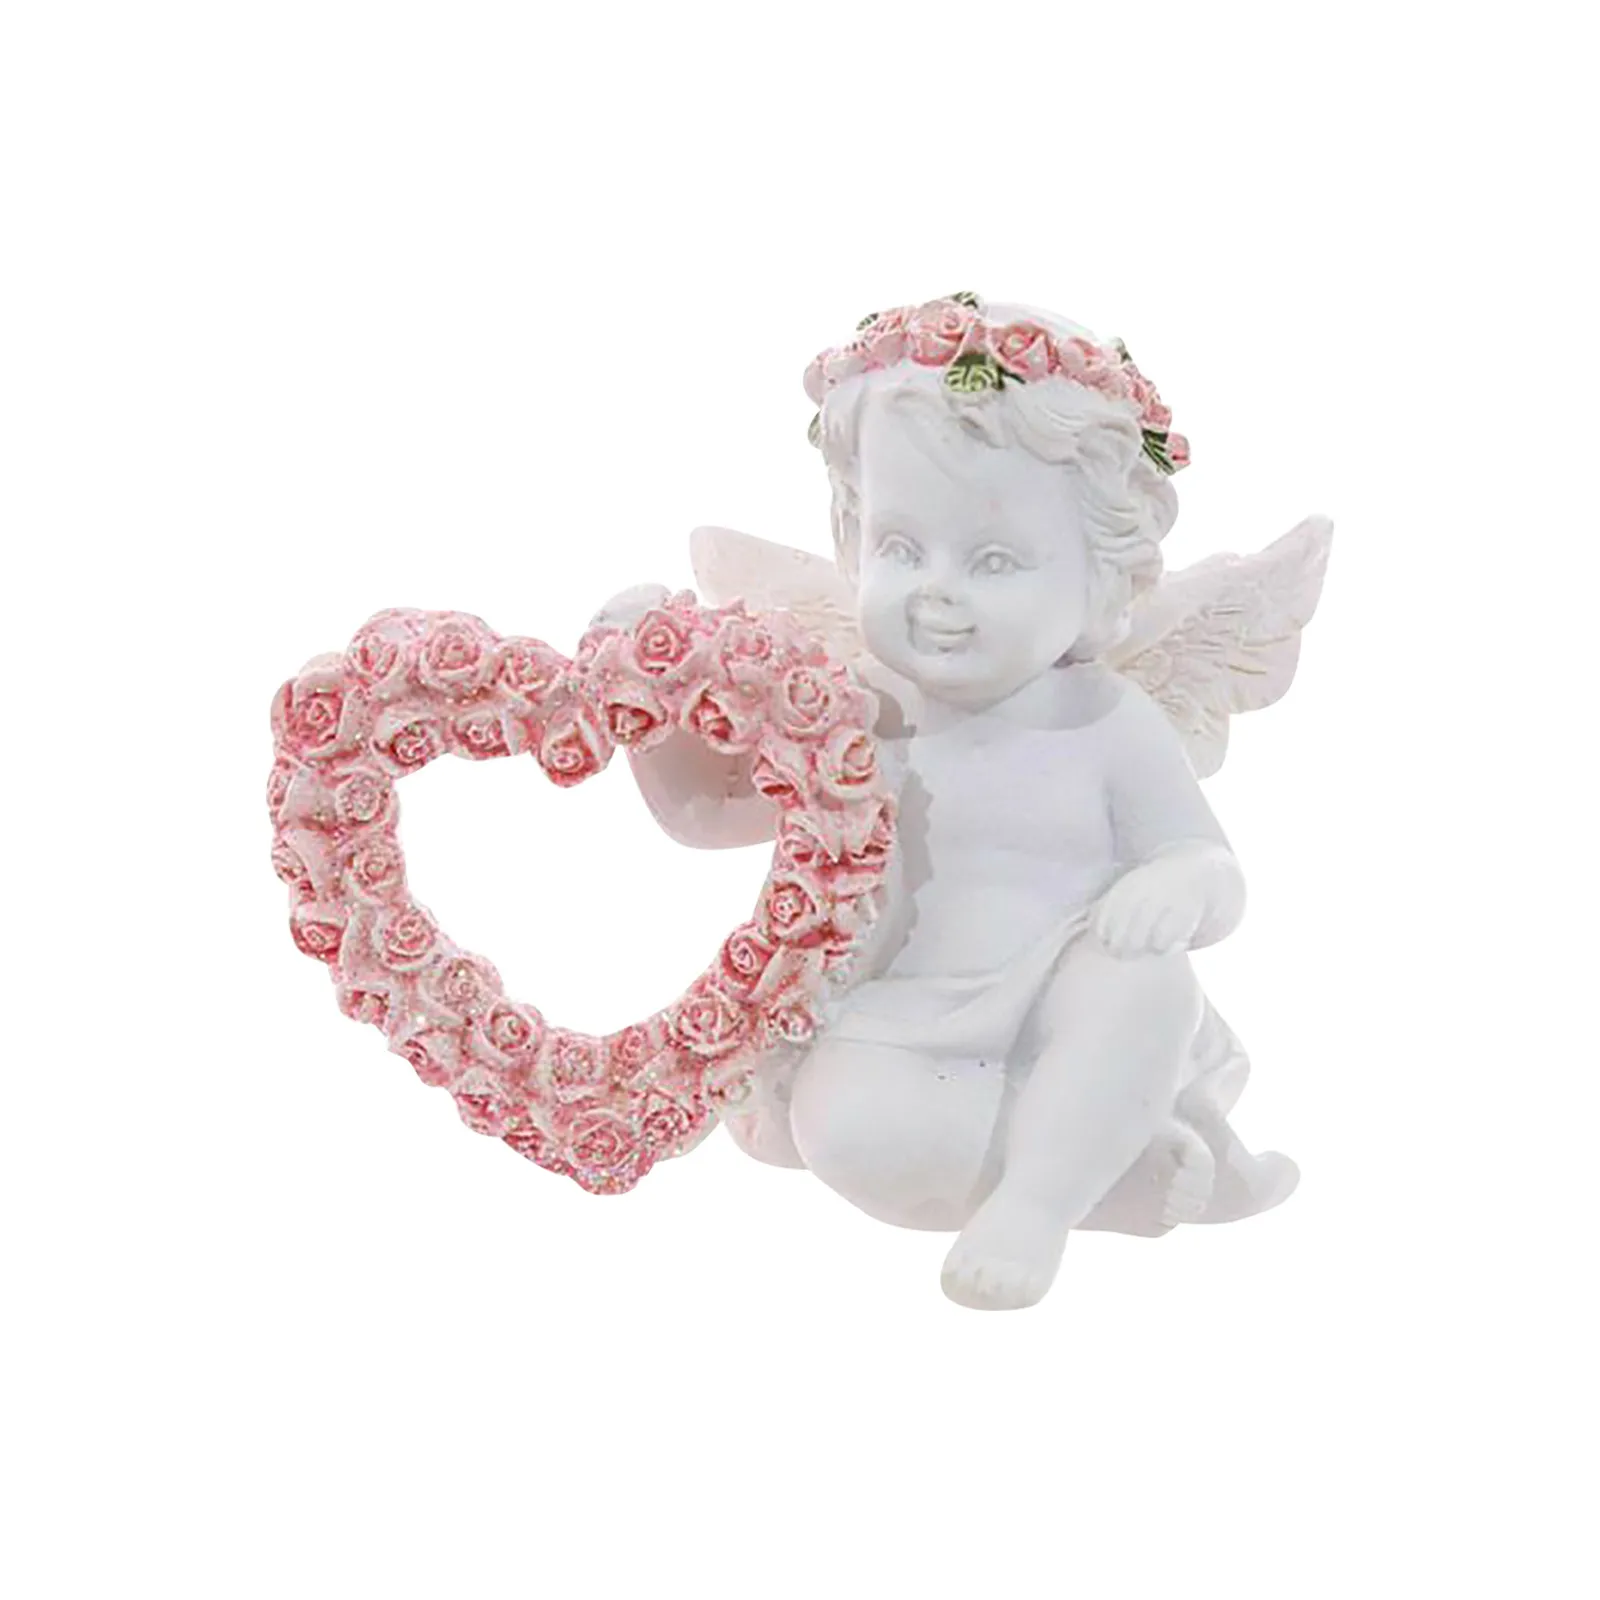 Angels Cherubs Figurine Ornaments Memorial Collectable Love Heart Rose Gift 